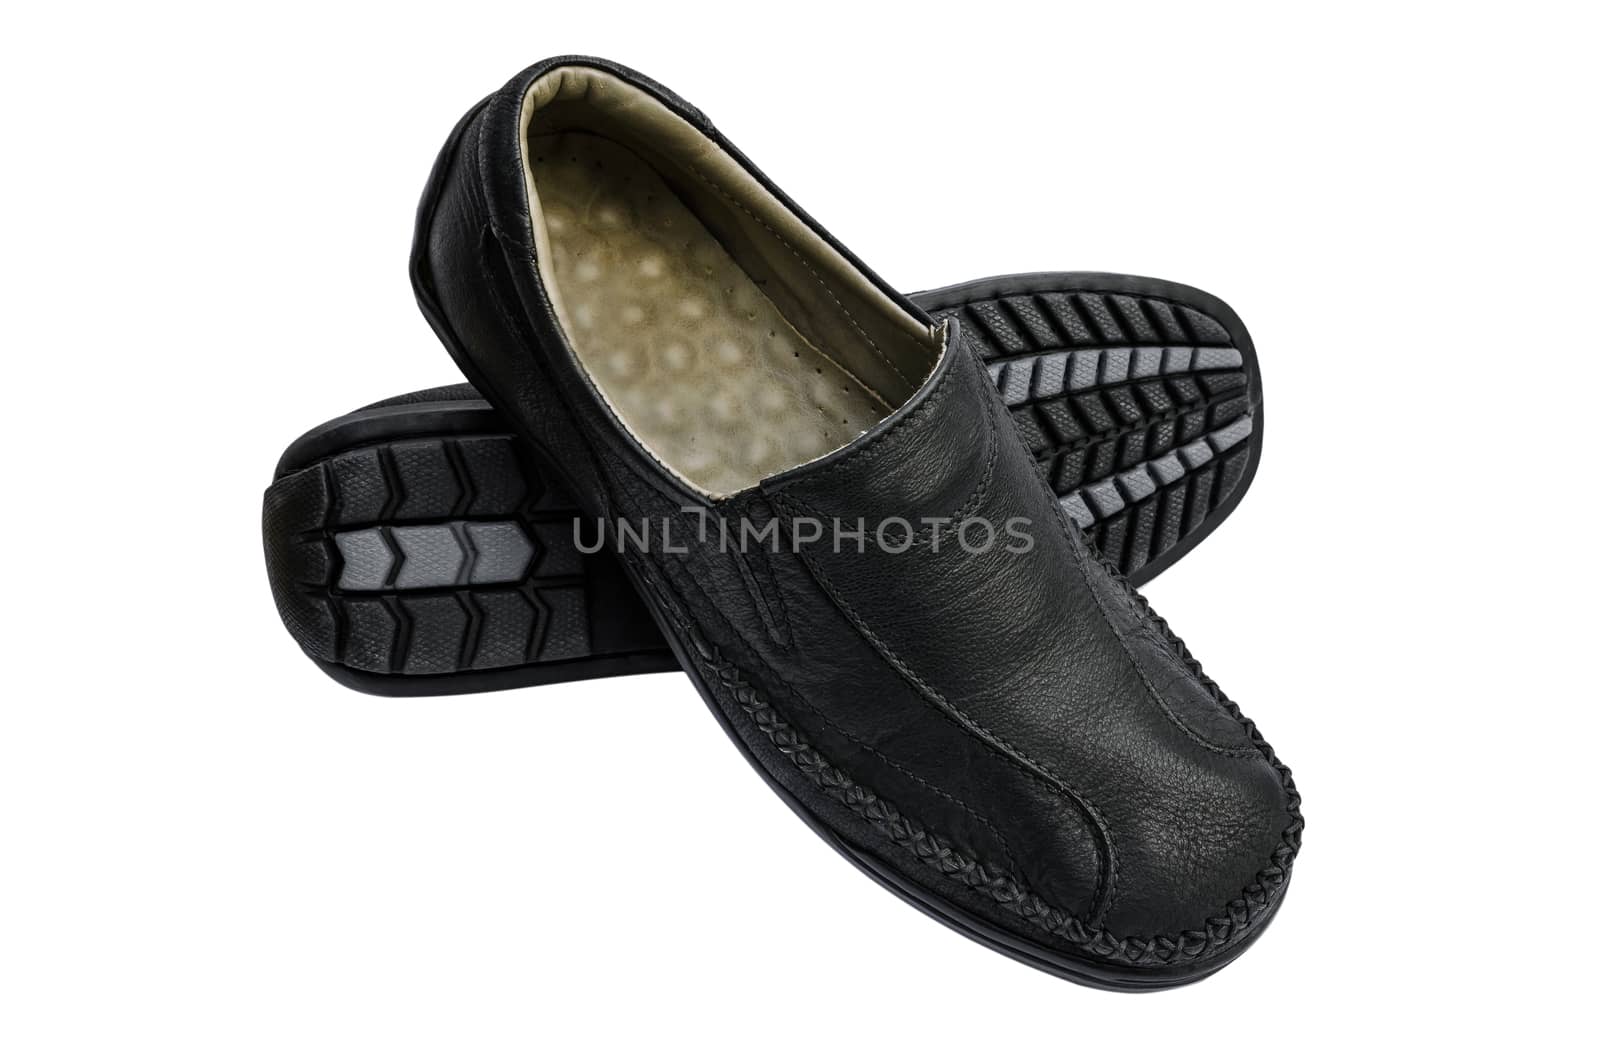 Black leather shoes by nop16